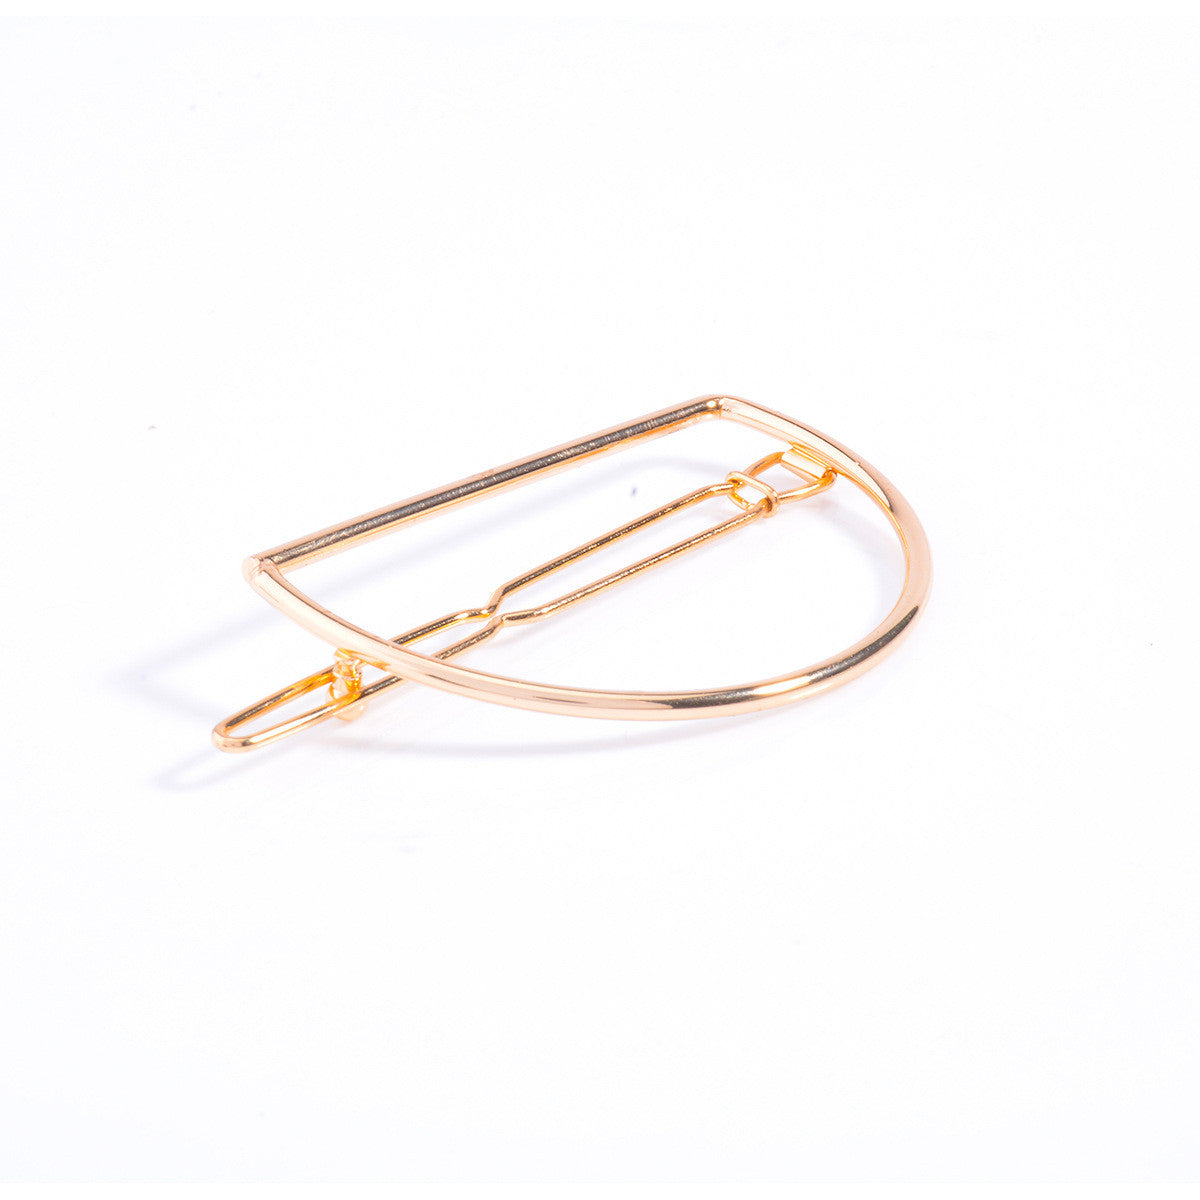 Simple D Shape Women's Hairpin - Oh Yours Fashion - 2